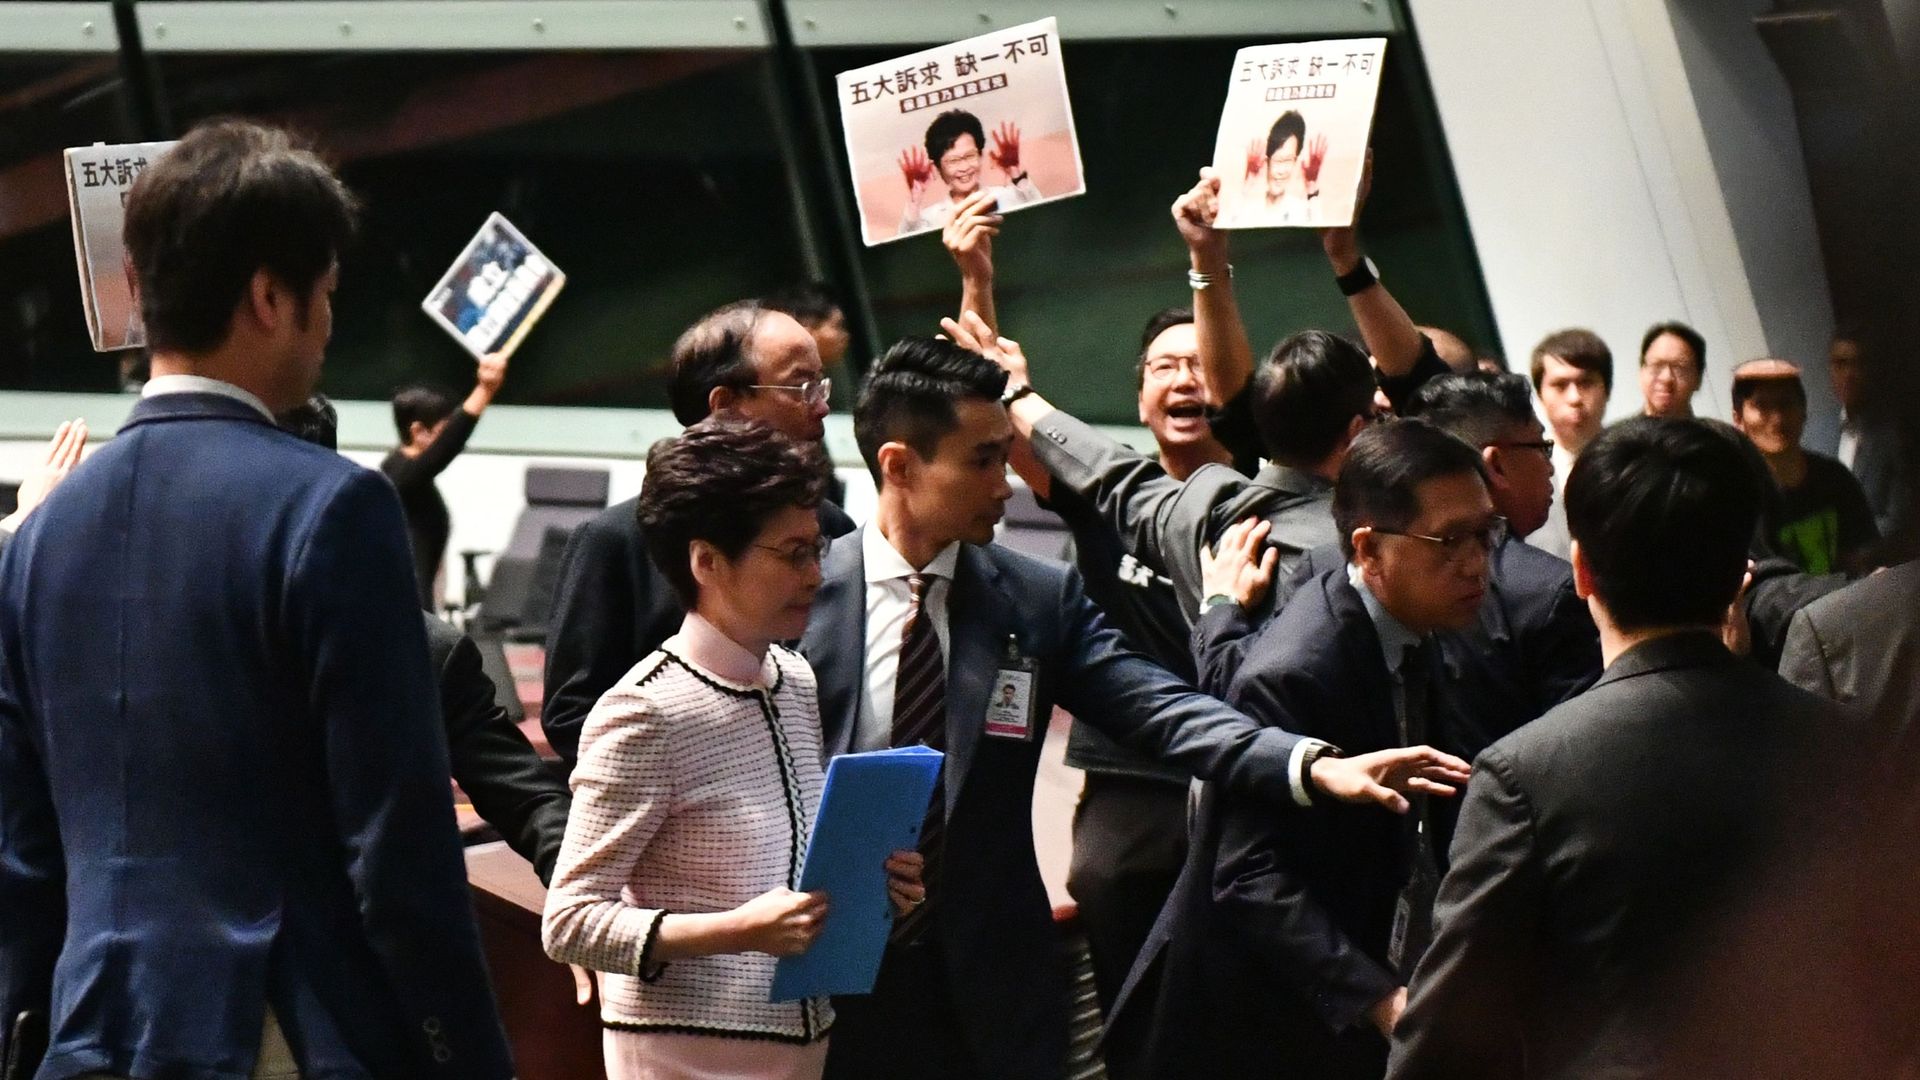 Hong Kong's Chief Executive Carrie Lam  leaves the chamber after trying to give her annual policy address